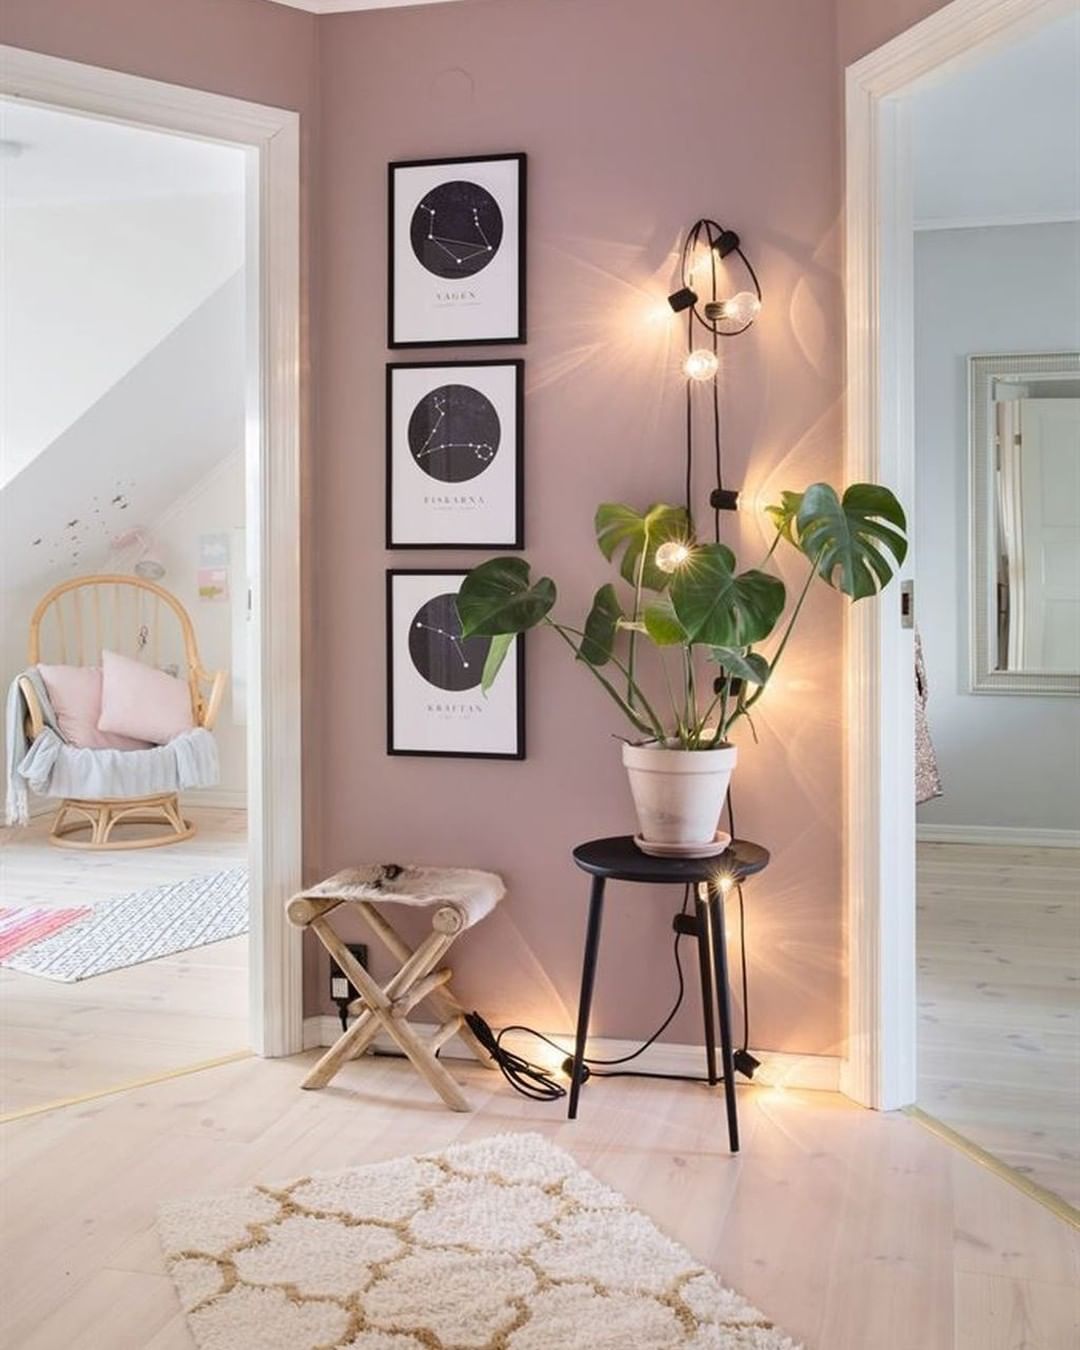 Genuine Pink Interior Design - How to Add This Trend Color to Your Home011